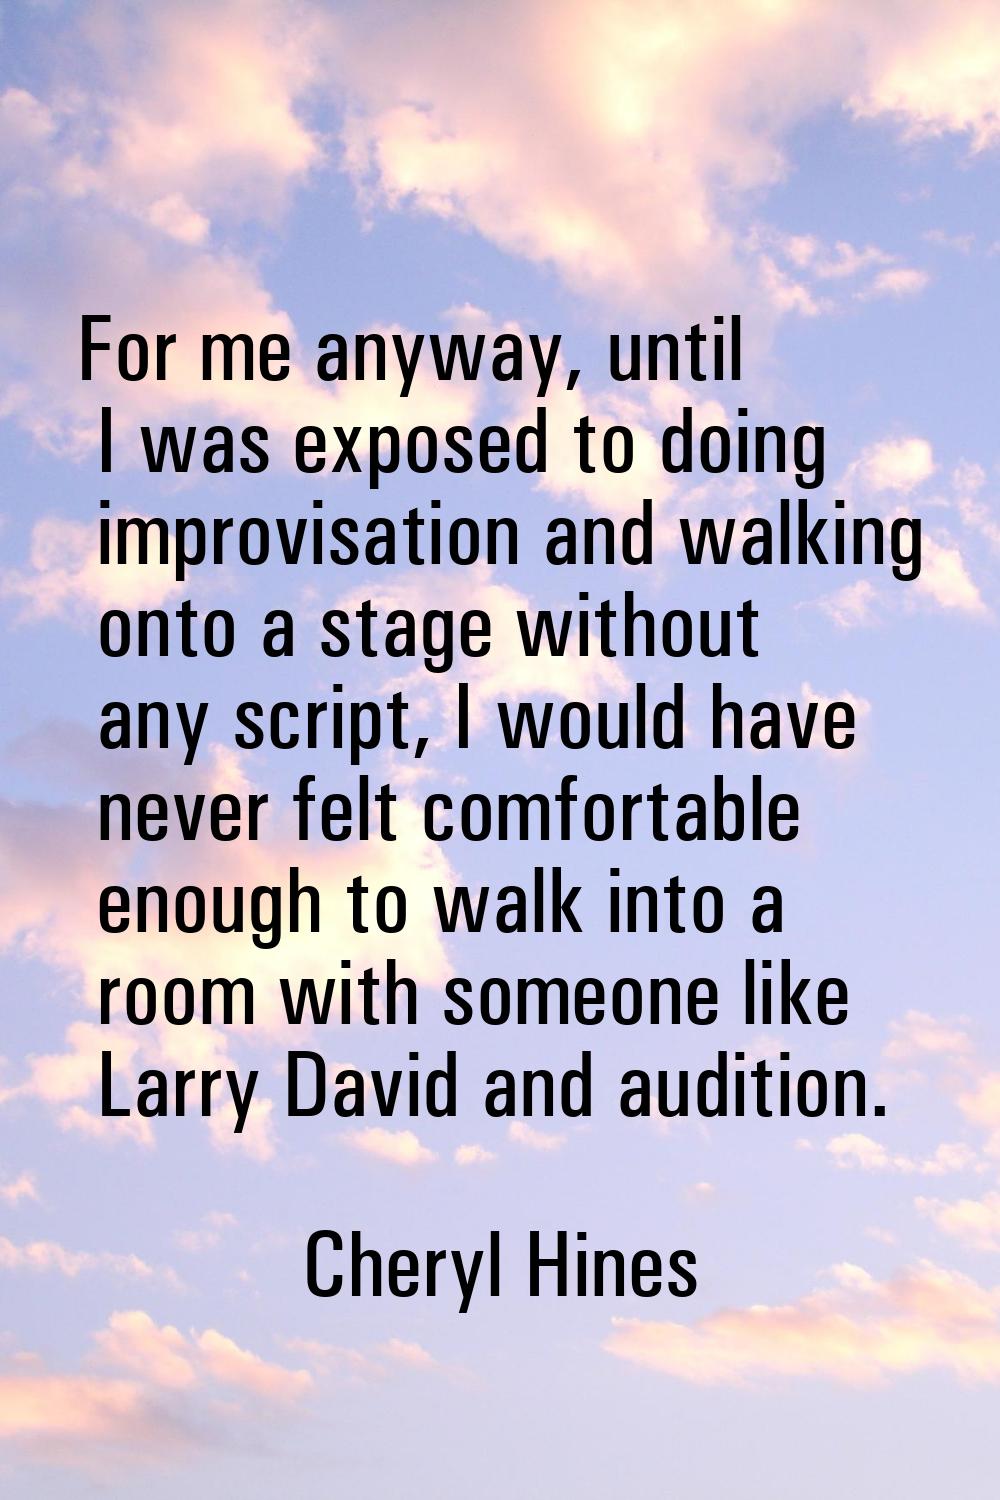 For me anyway, until I was exposed to doing improvisation and walking onto a stage without any scri